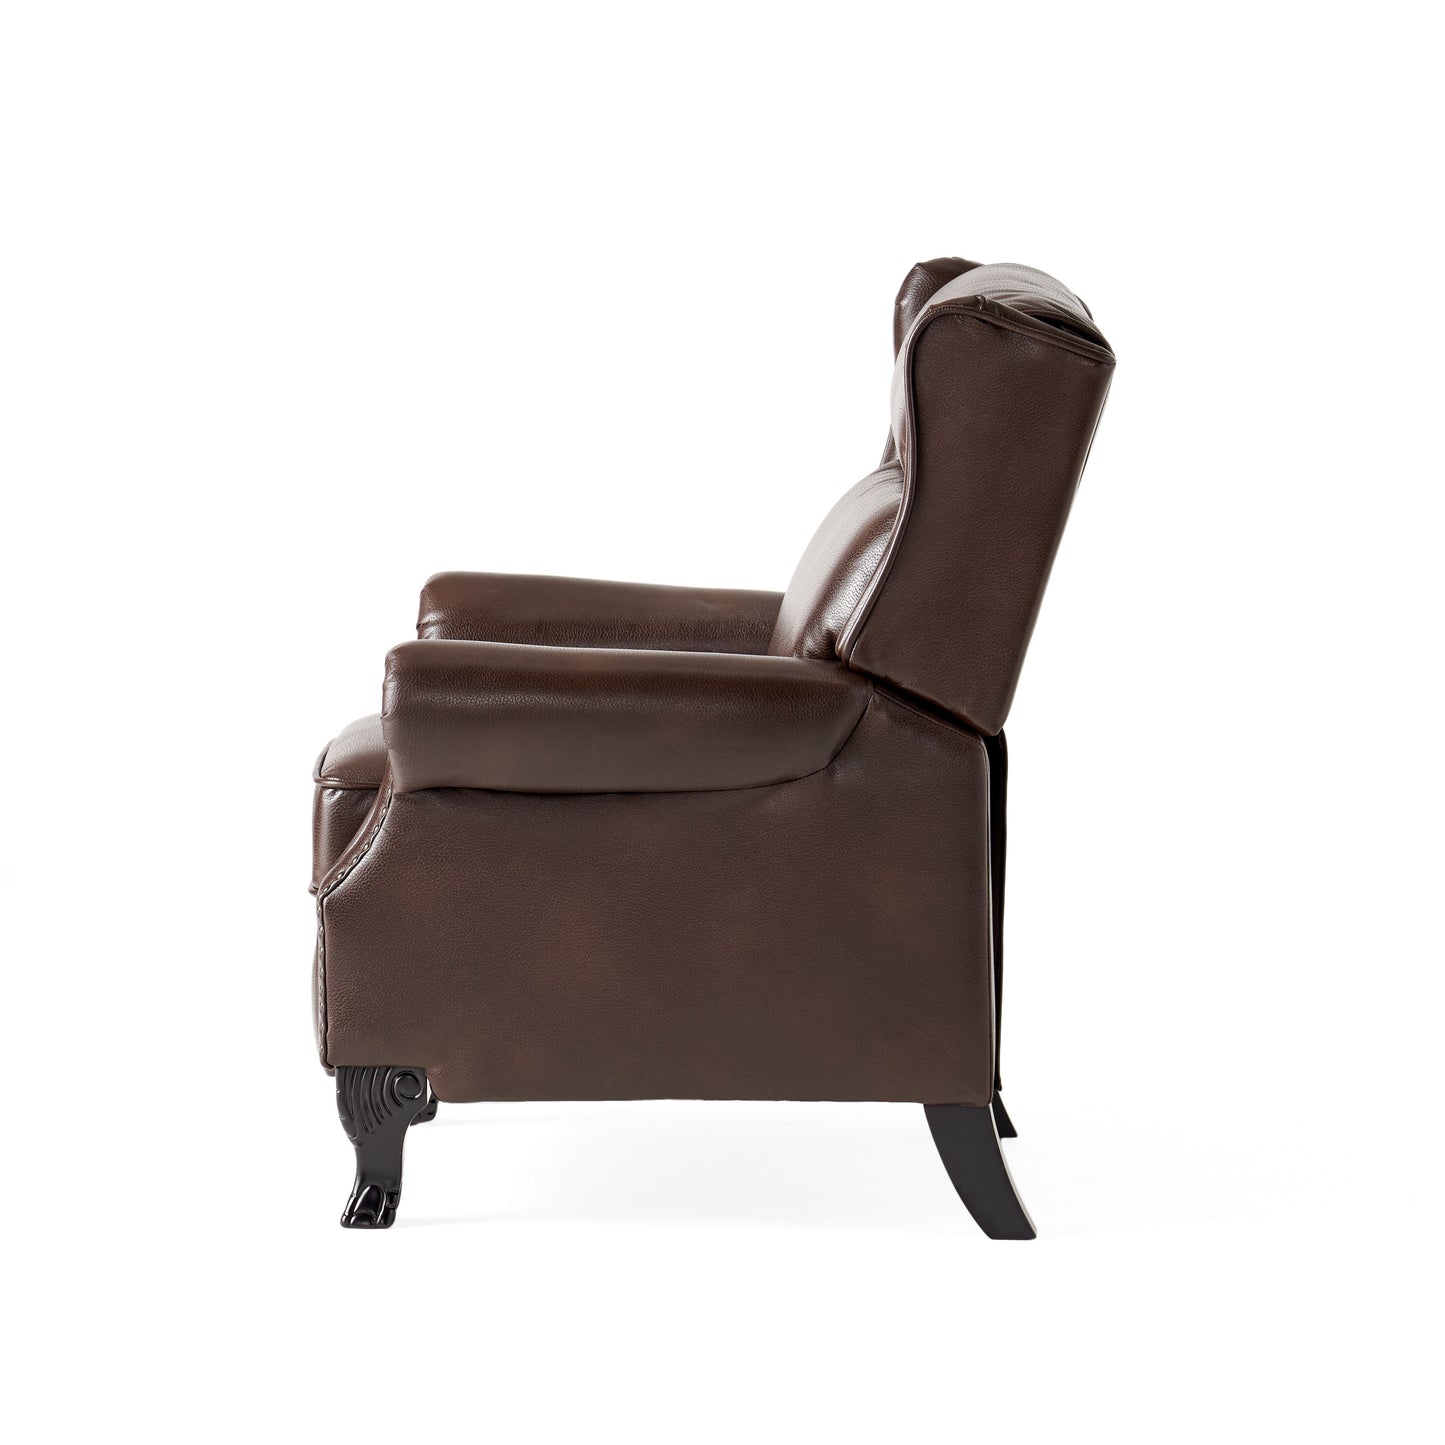 Curtis Leather Recliner Club Chair